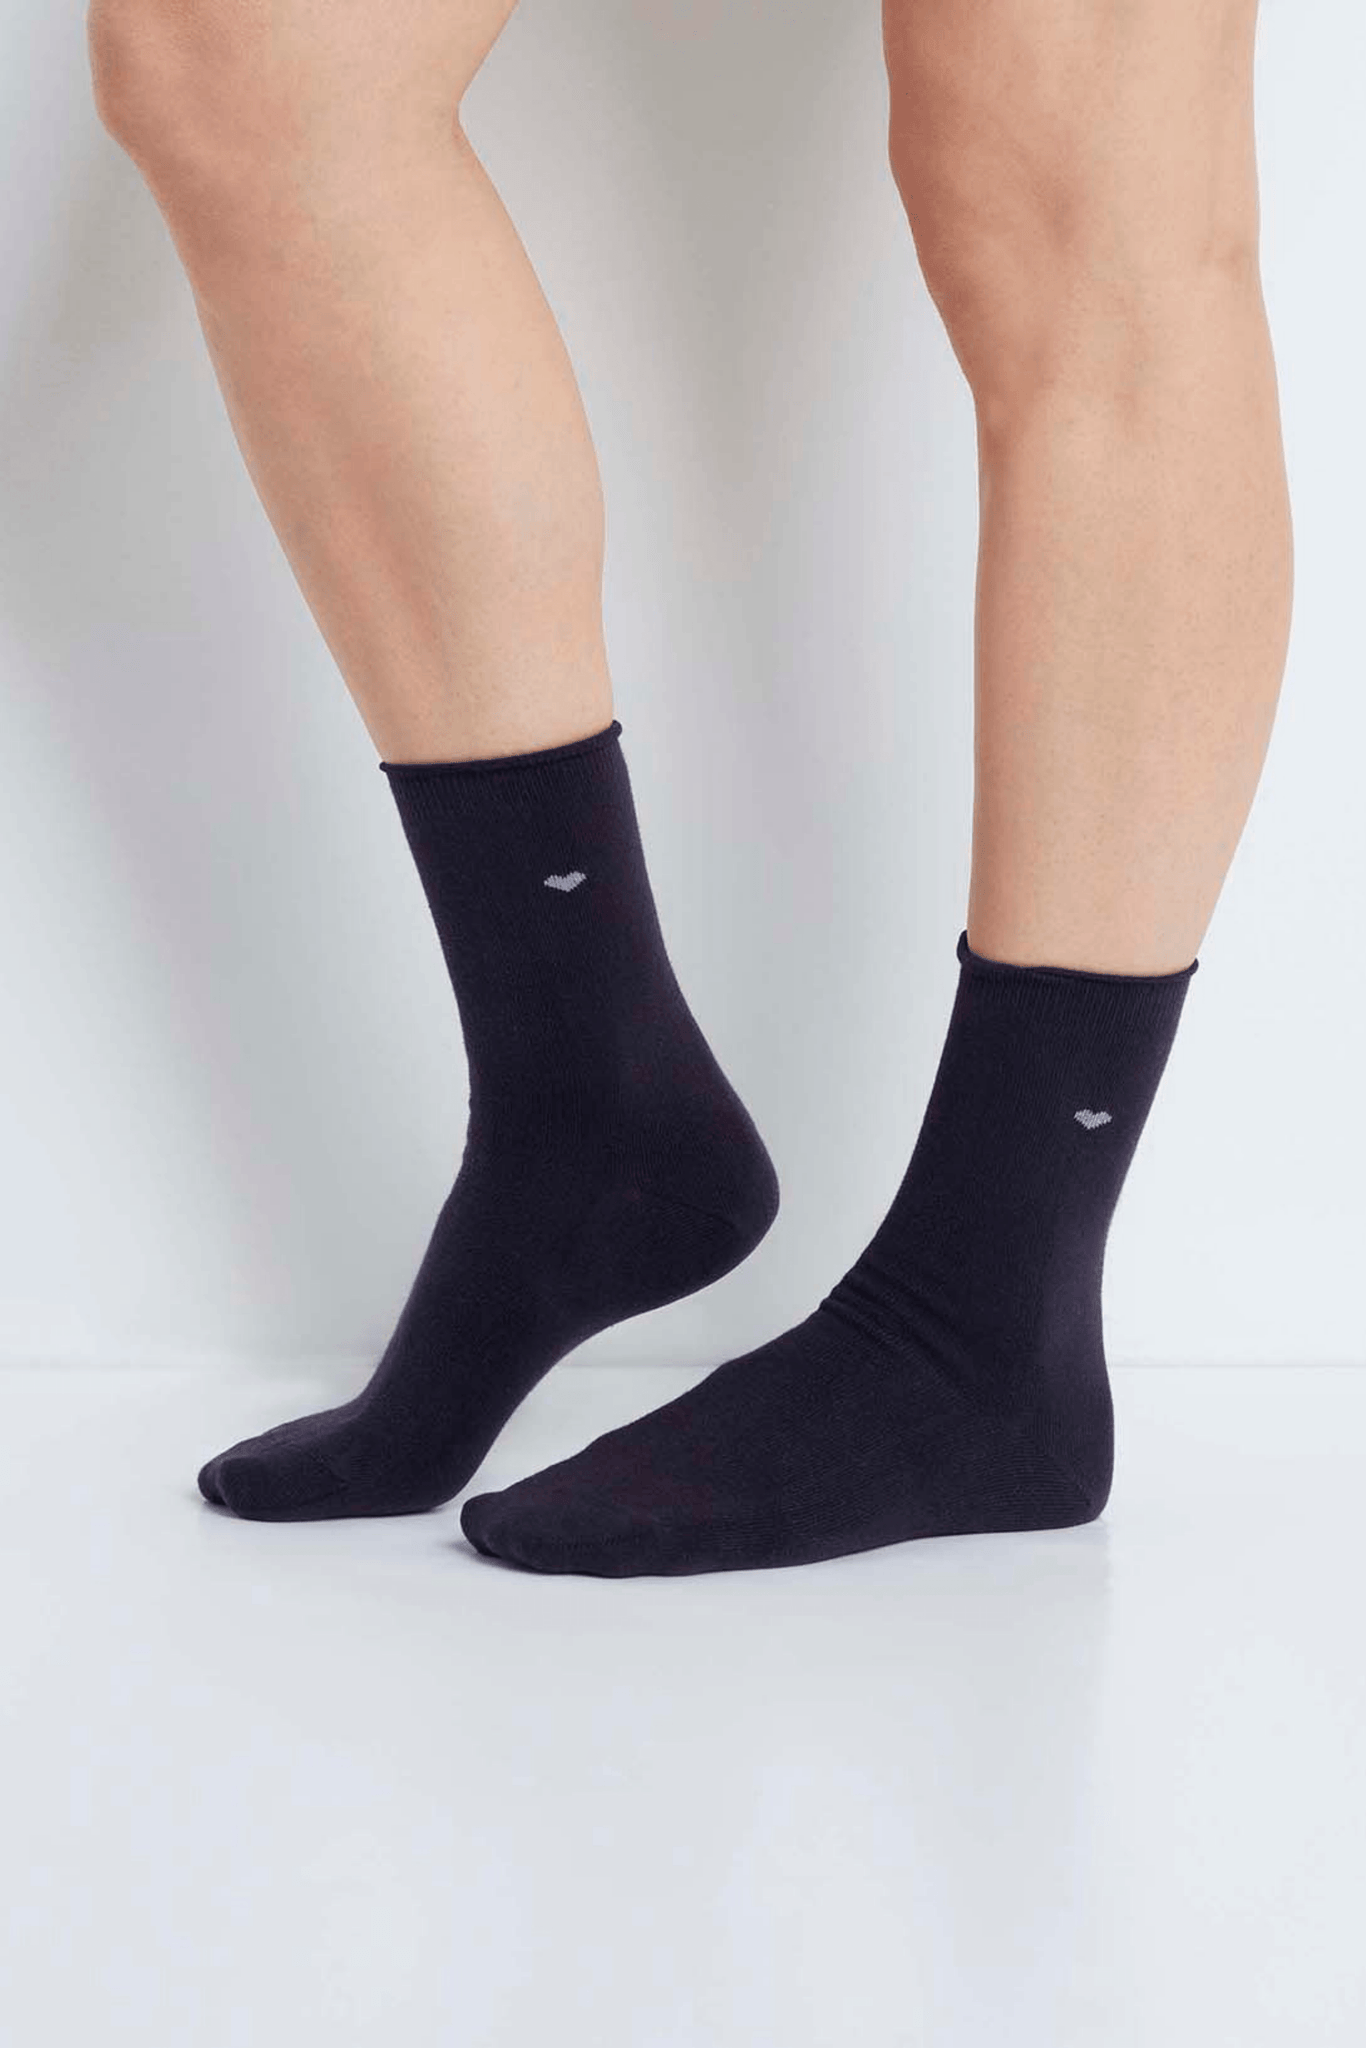 Buy EASTERN CLUB TRANSPARENT COTTON SKIN COLOR SOCKS FOR WOMEN-1 PAIR  Online at Low Prices in India 